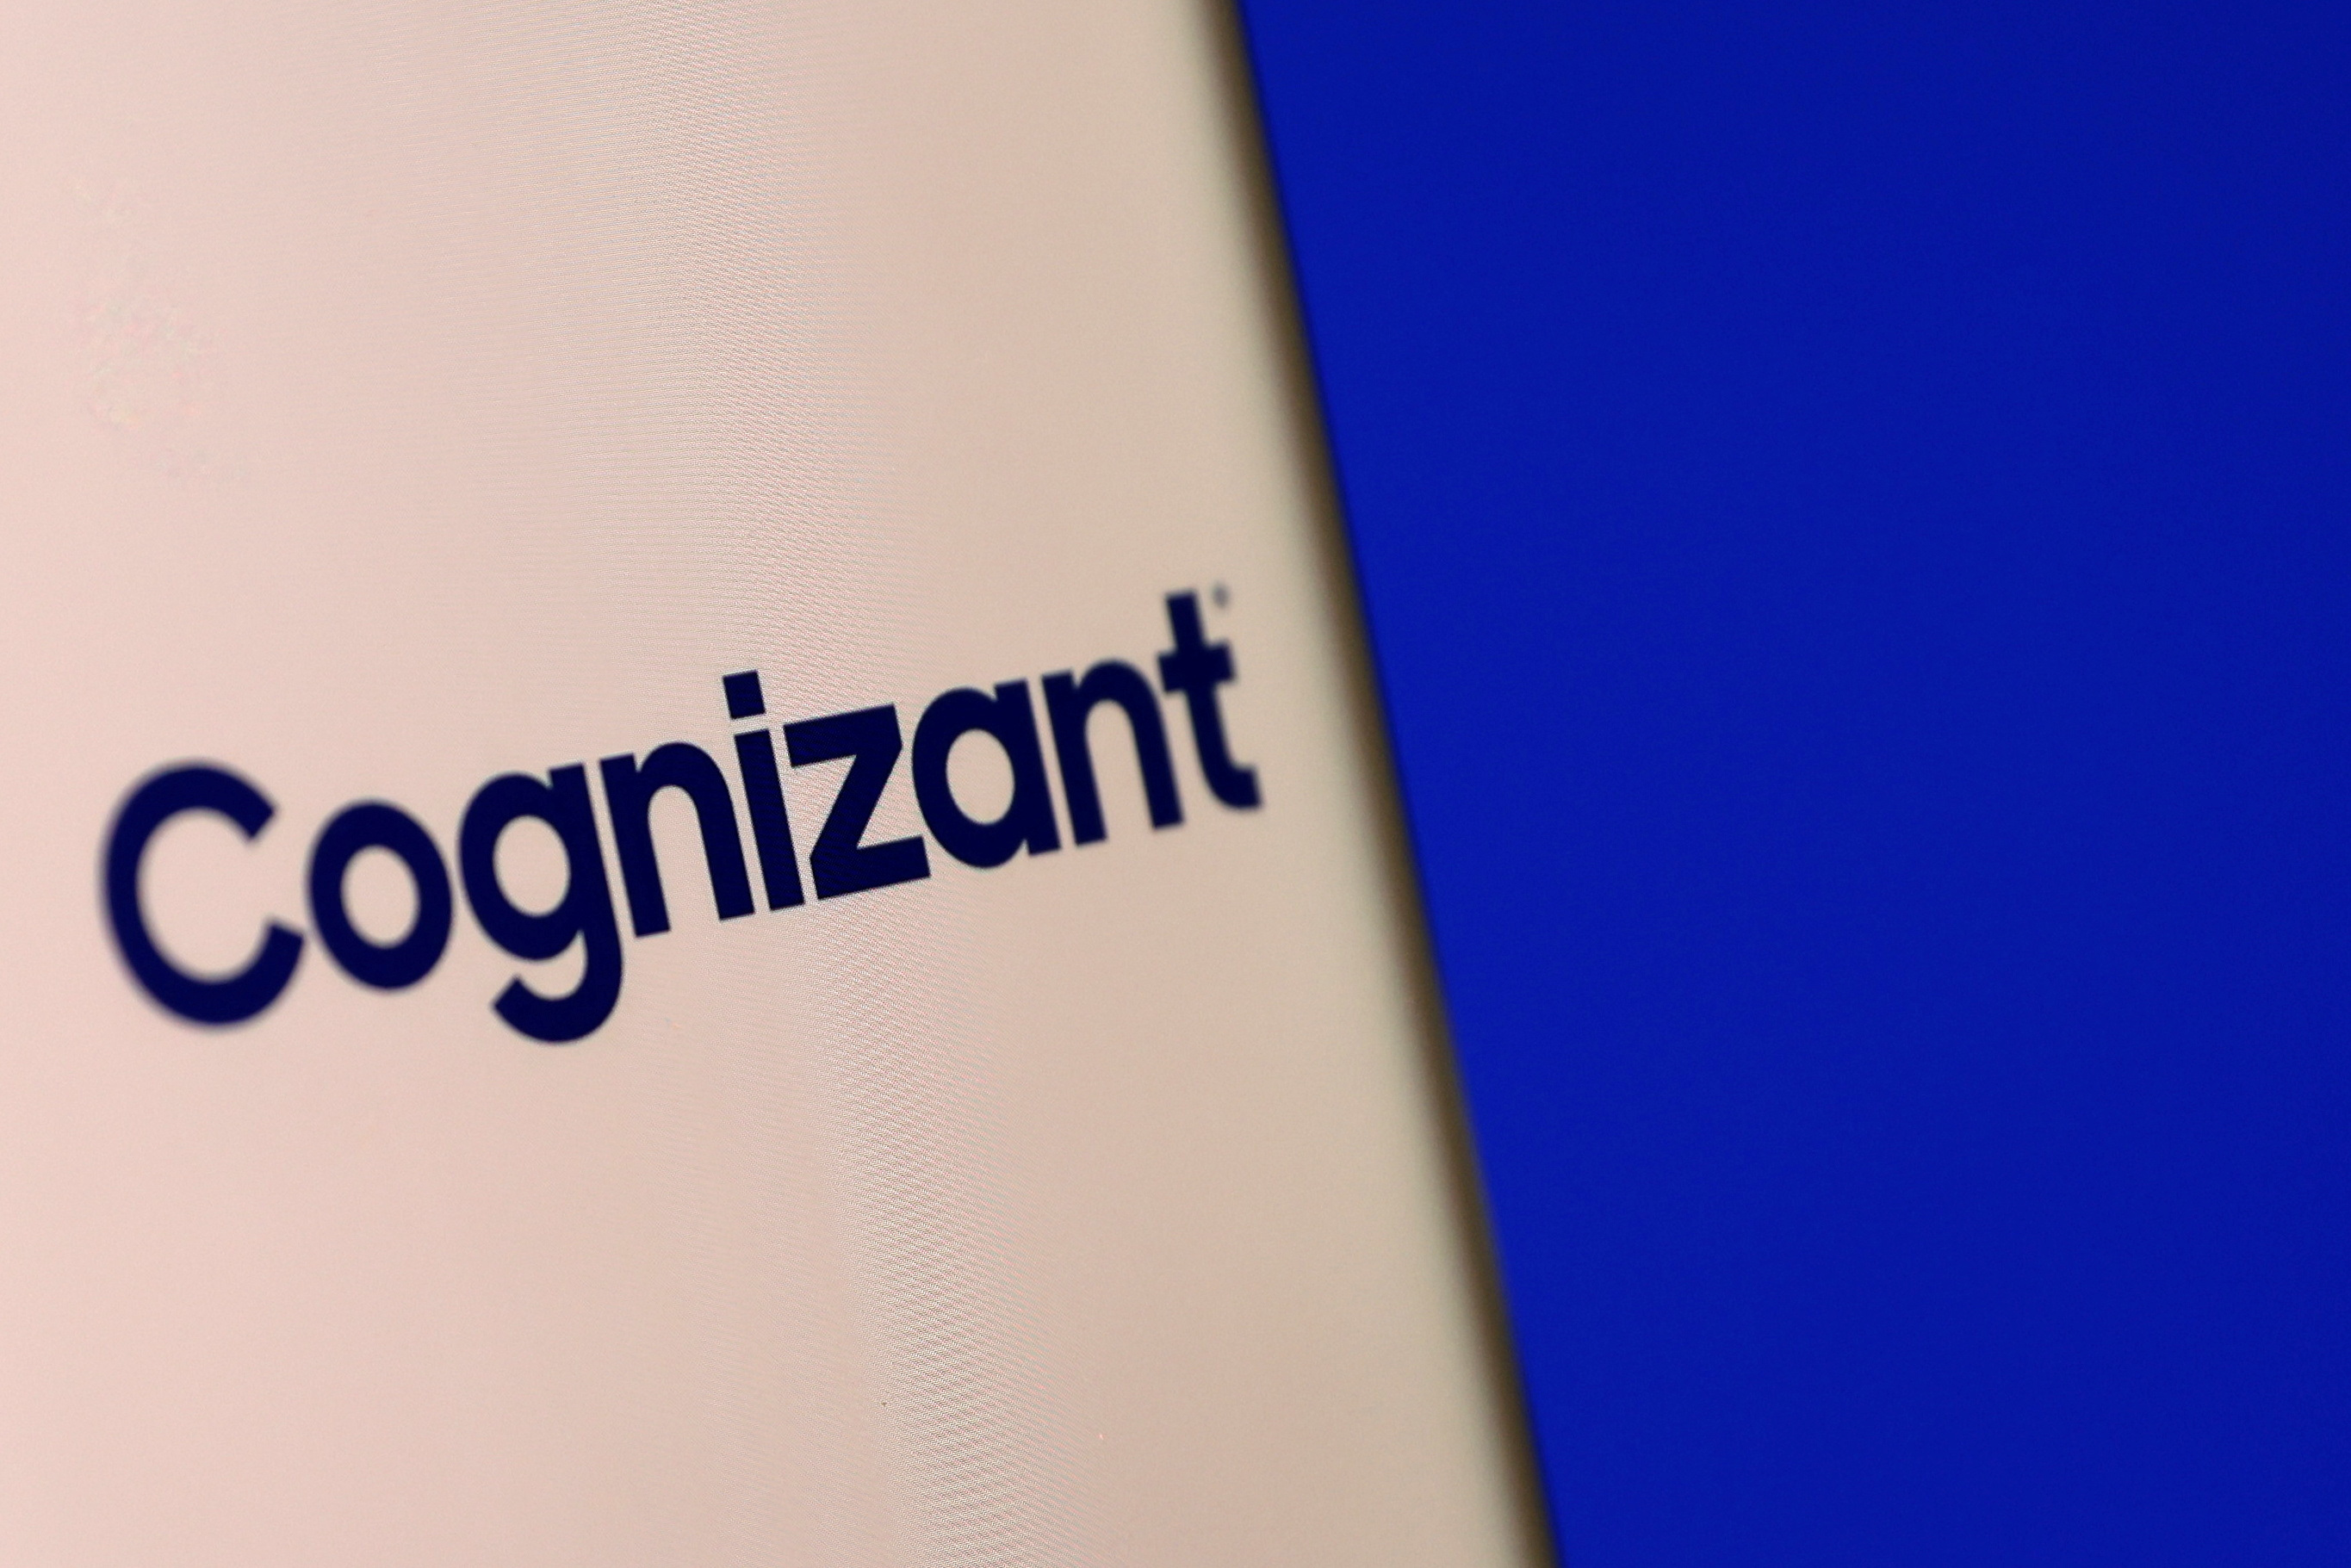 Illustration shows smartphone with Cognizant's logo displayed